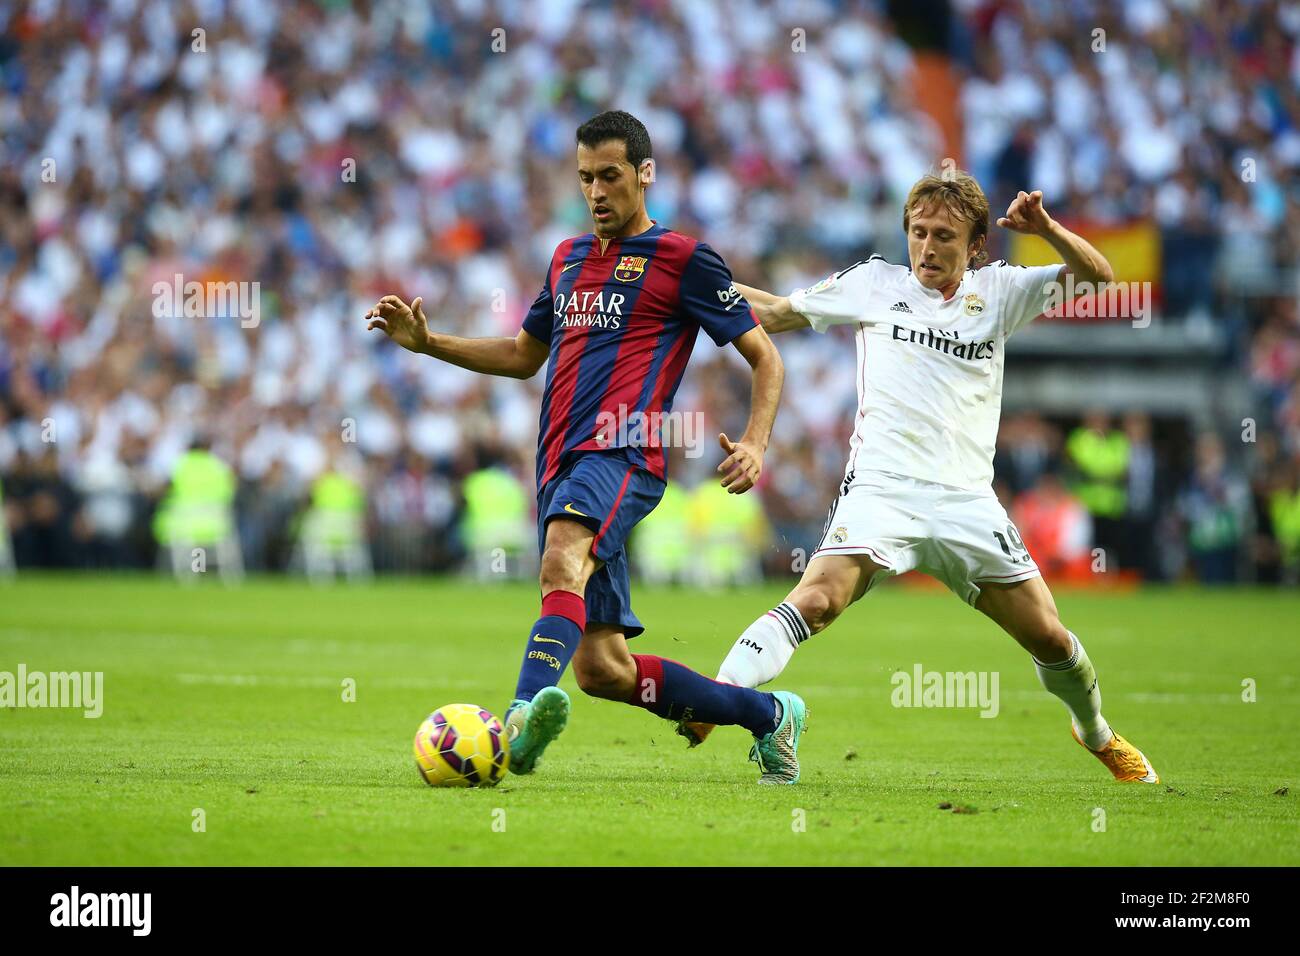 Sergio Busquets of FC Barcelona evades Luka Modric of Real Madrid during the Spanish Championship Liga football match between Real Madrid CF and FC Barcelona, at Santiago Bernabeu Stadium in Madrid, Spain, on October 25, 2014. Photo Manuel Blondeau / AOP.press / DPPI Stock Photo